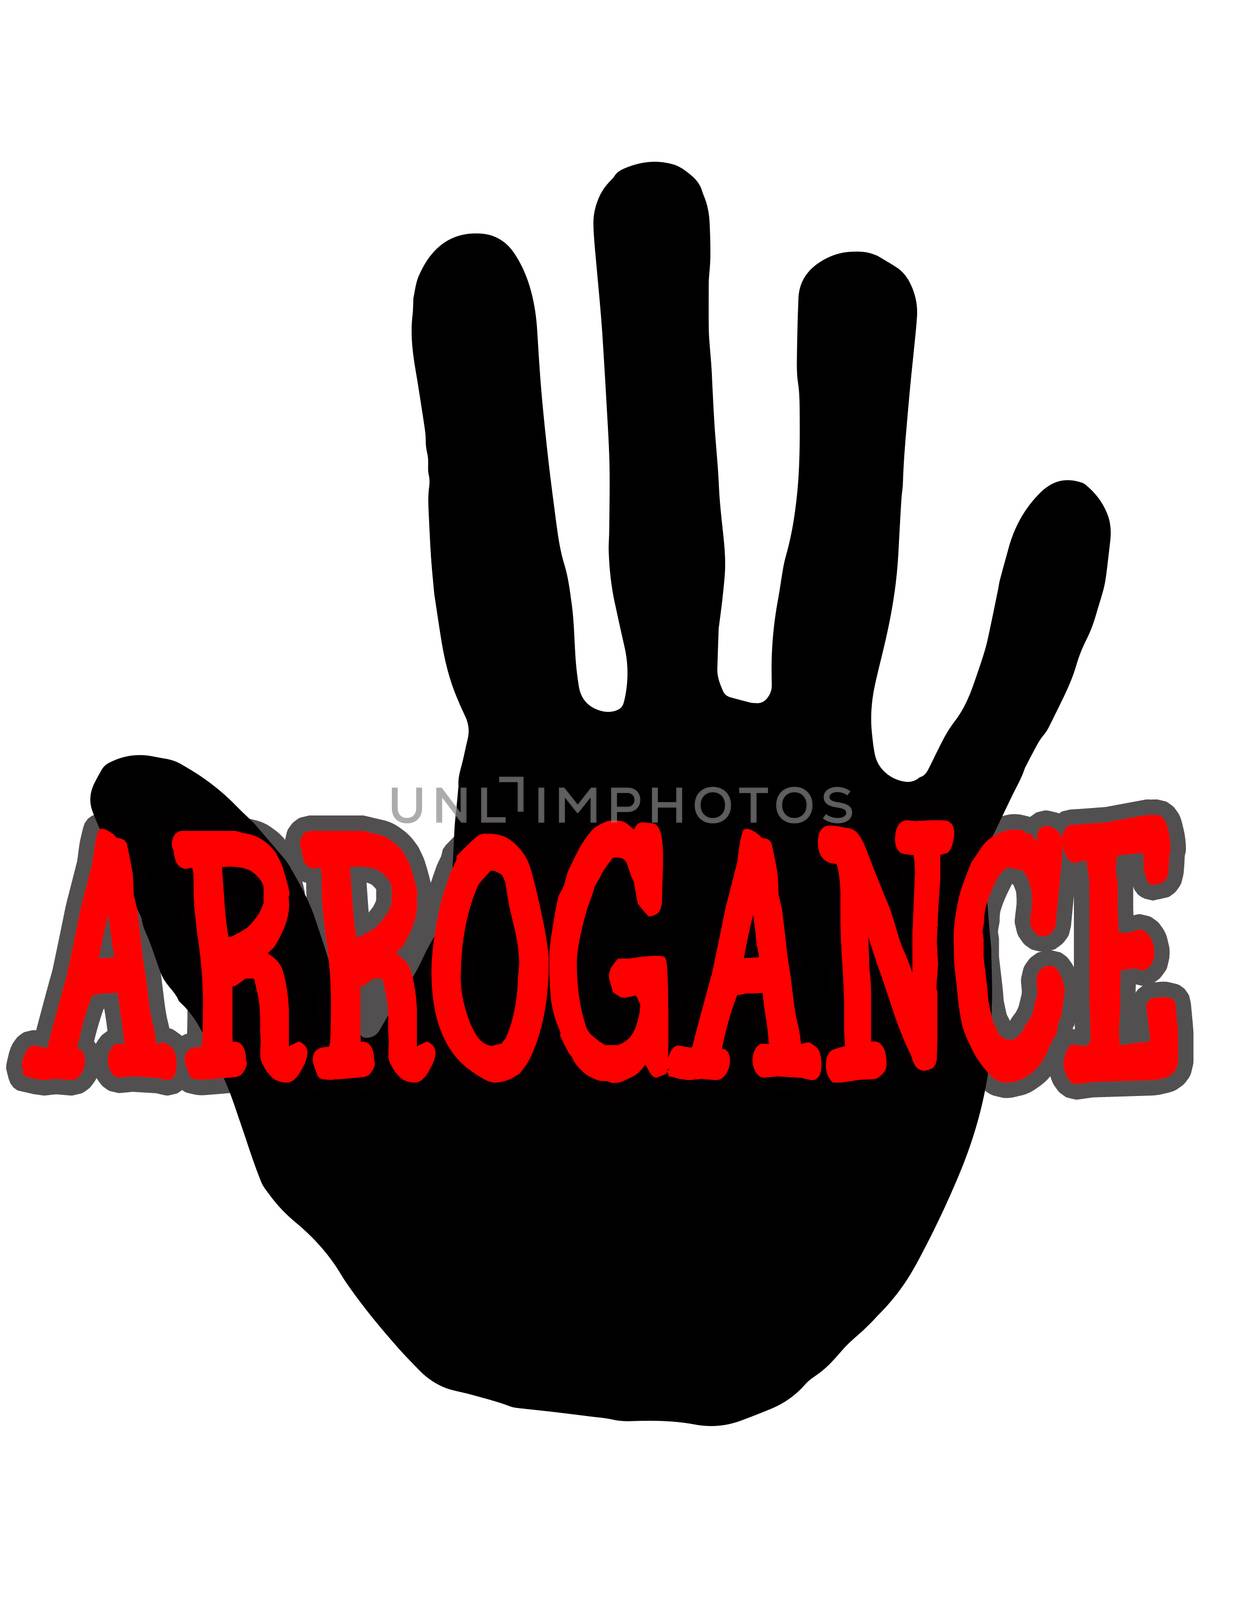 Man handprint isolated on white background showing stop arrogance